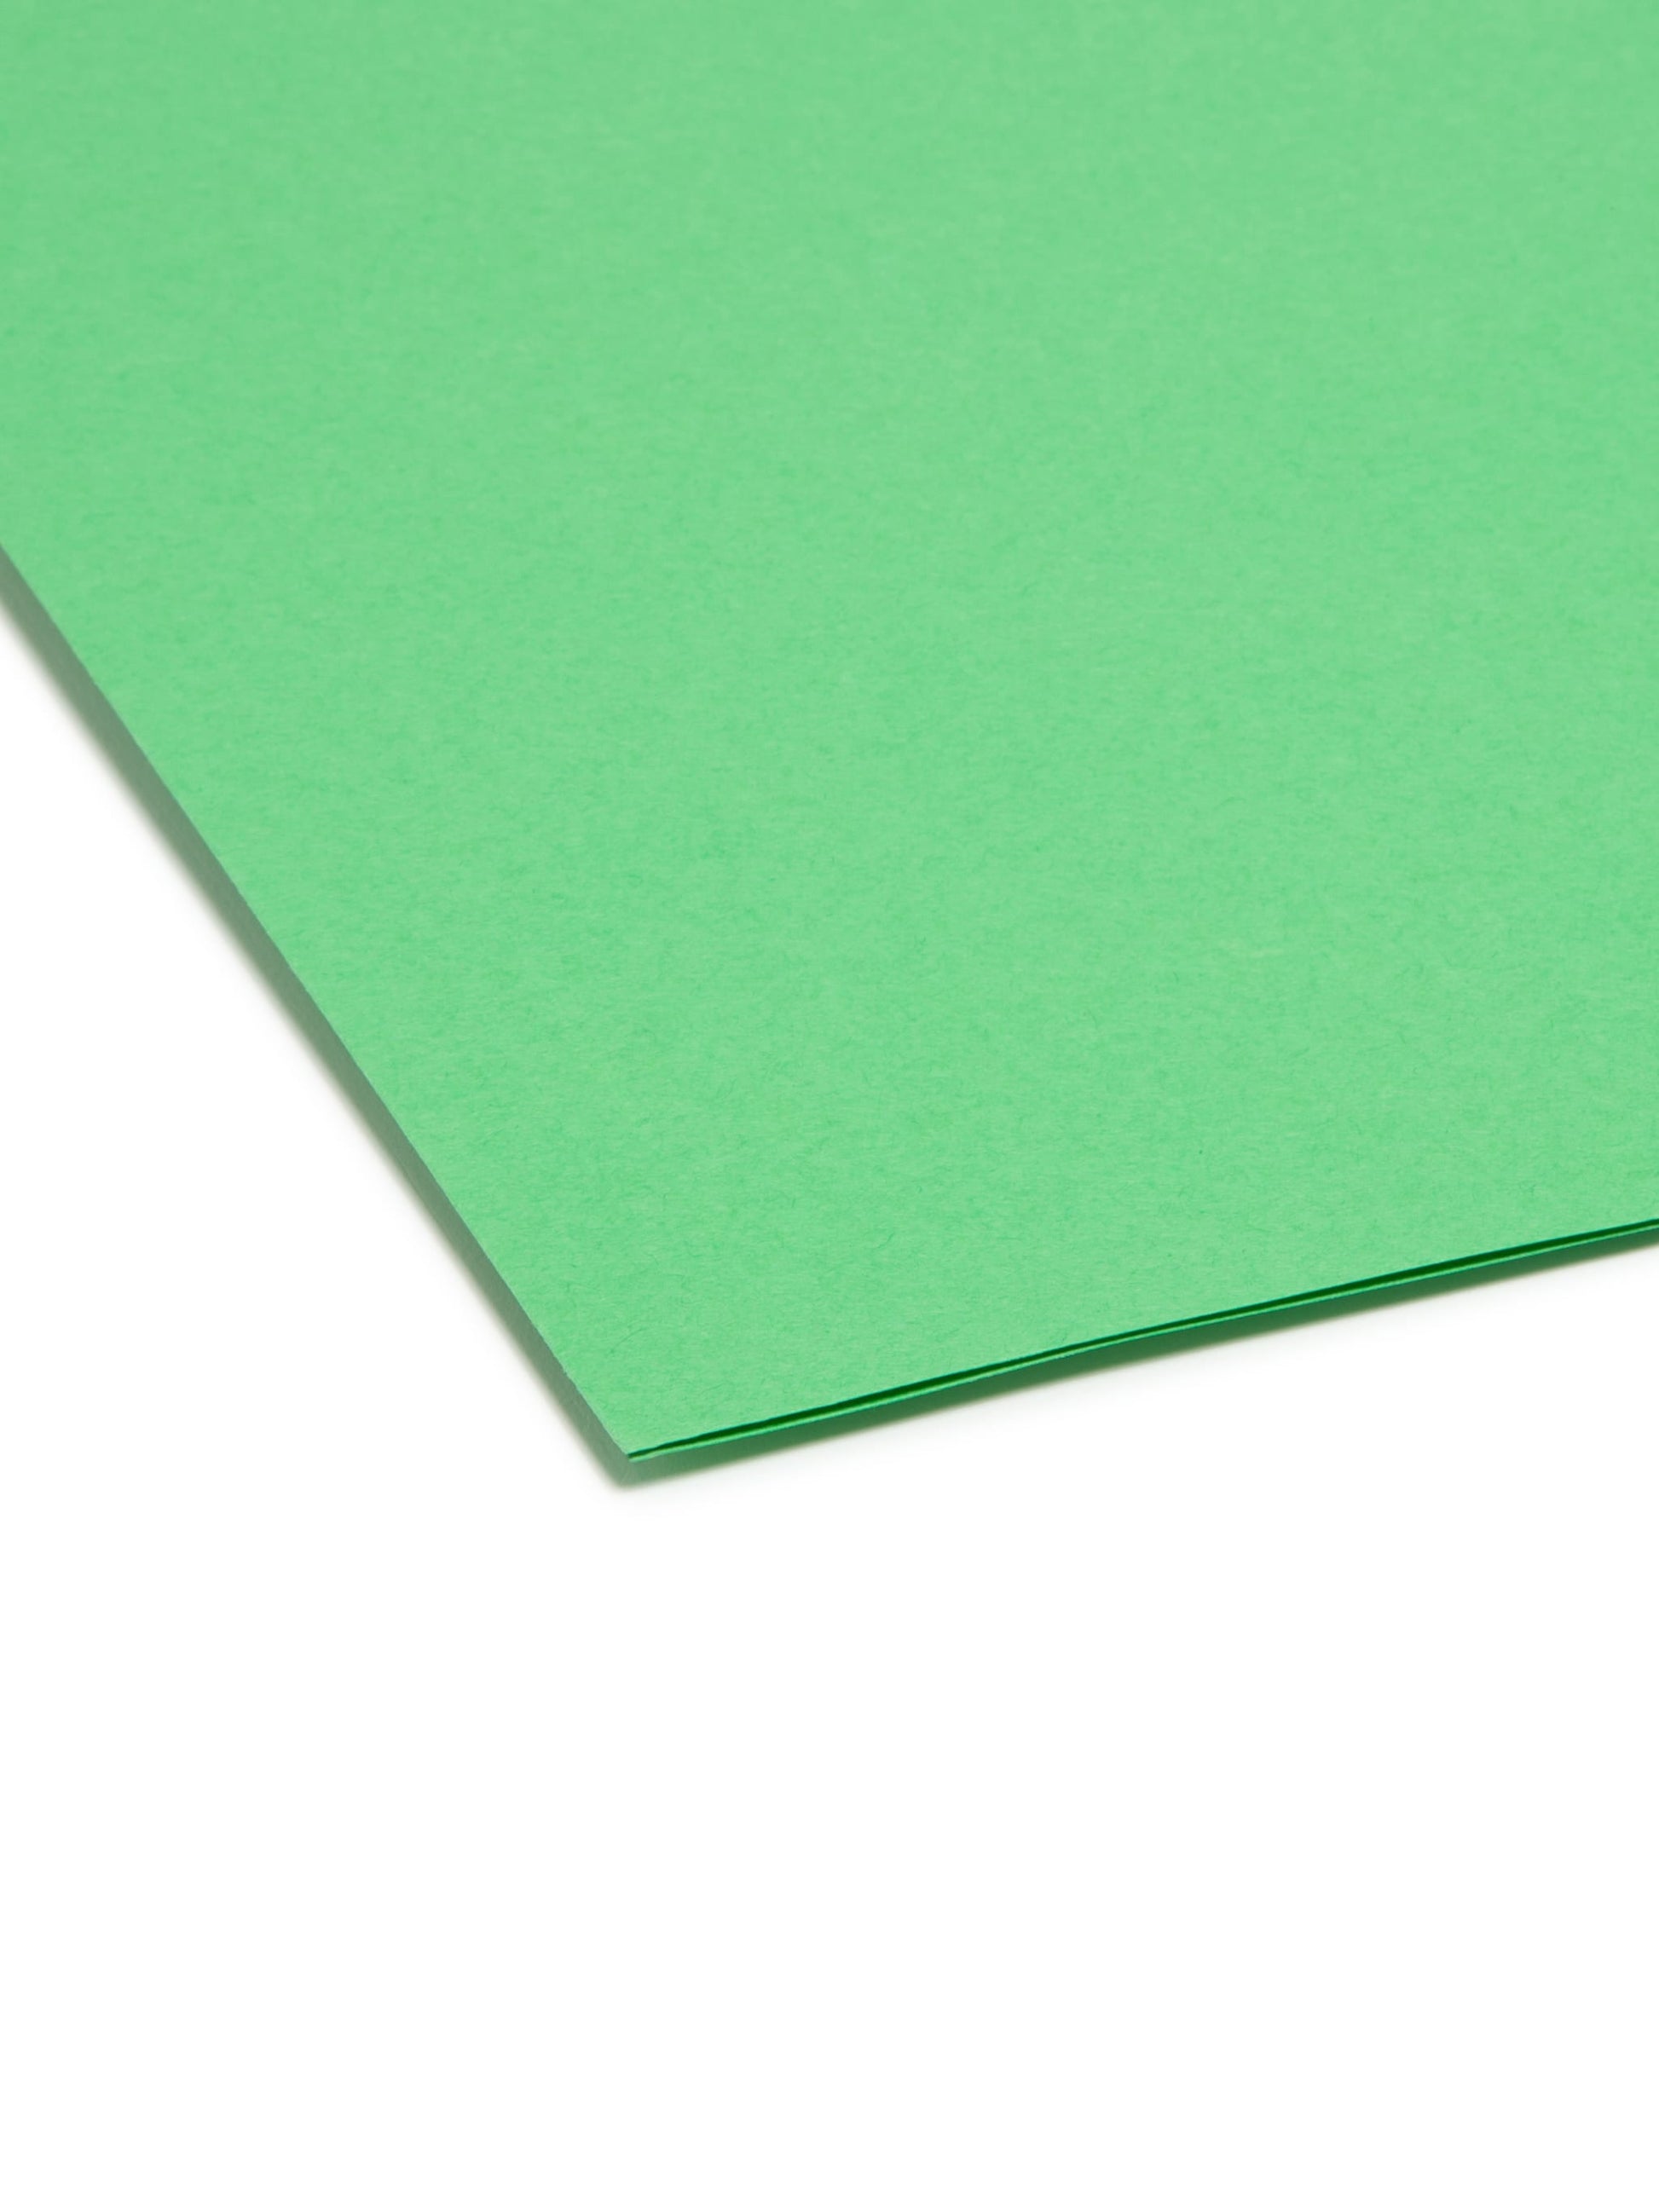 Standard File Folders, Straight-Cut Tab, Green Color, Letter Size, Set of 100, 086486109390